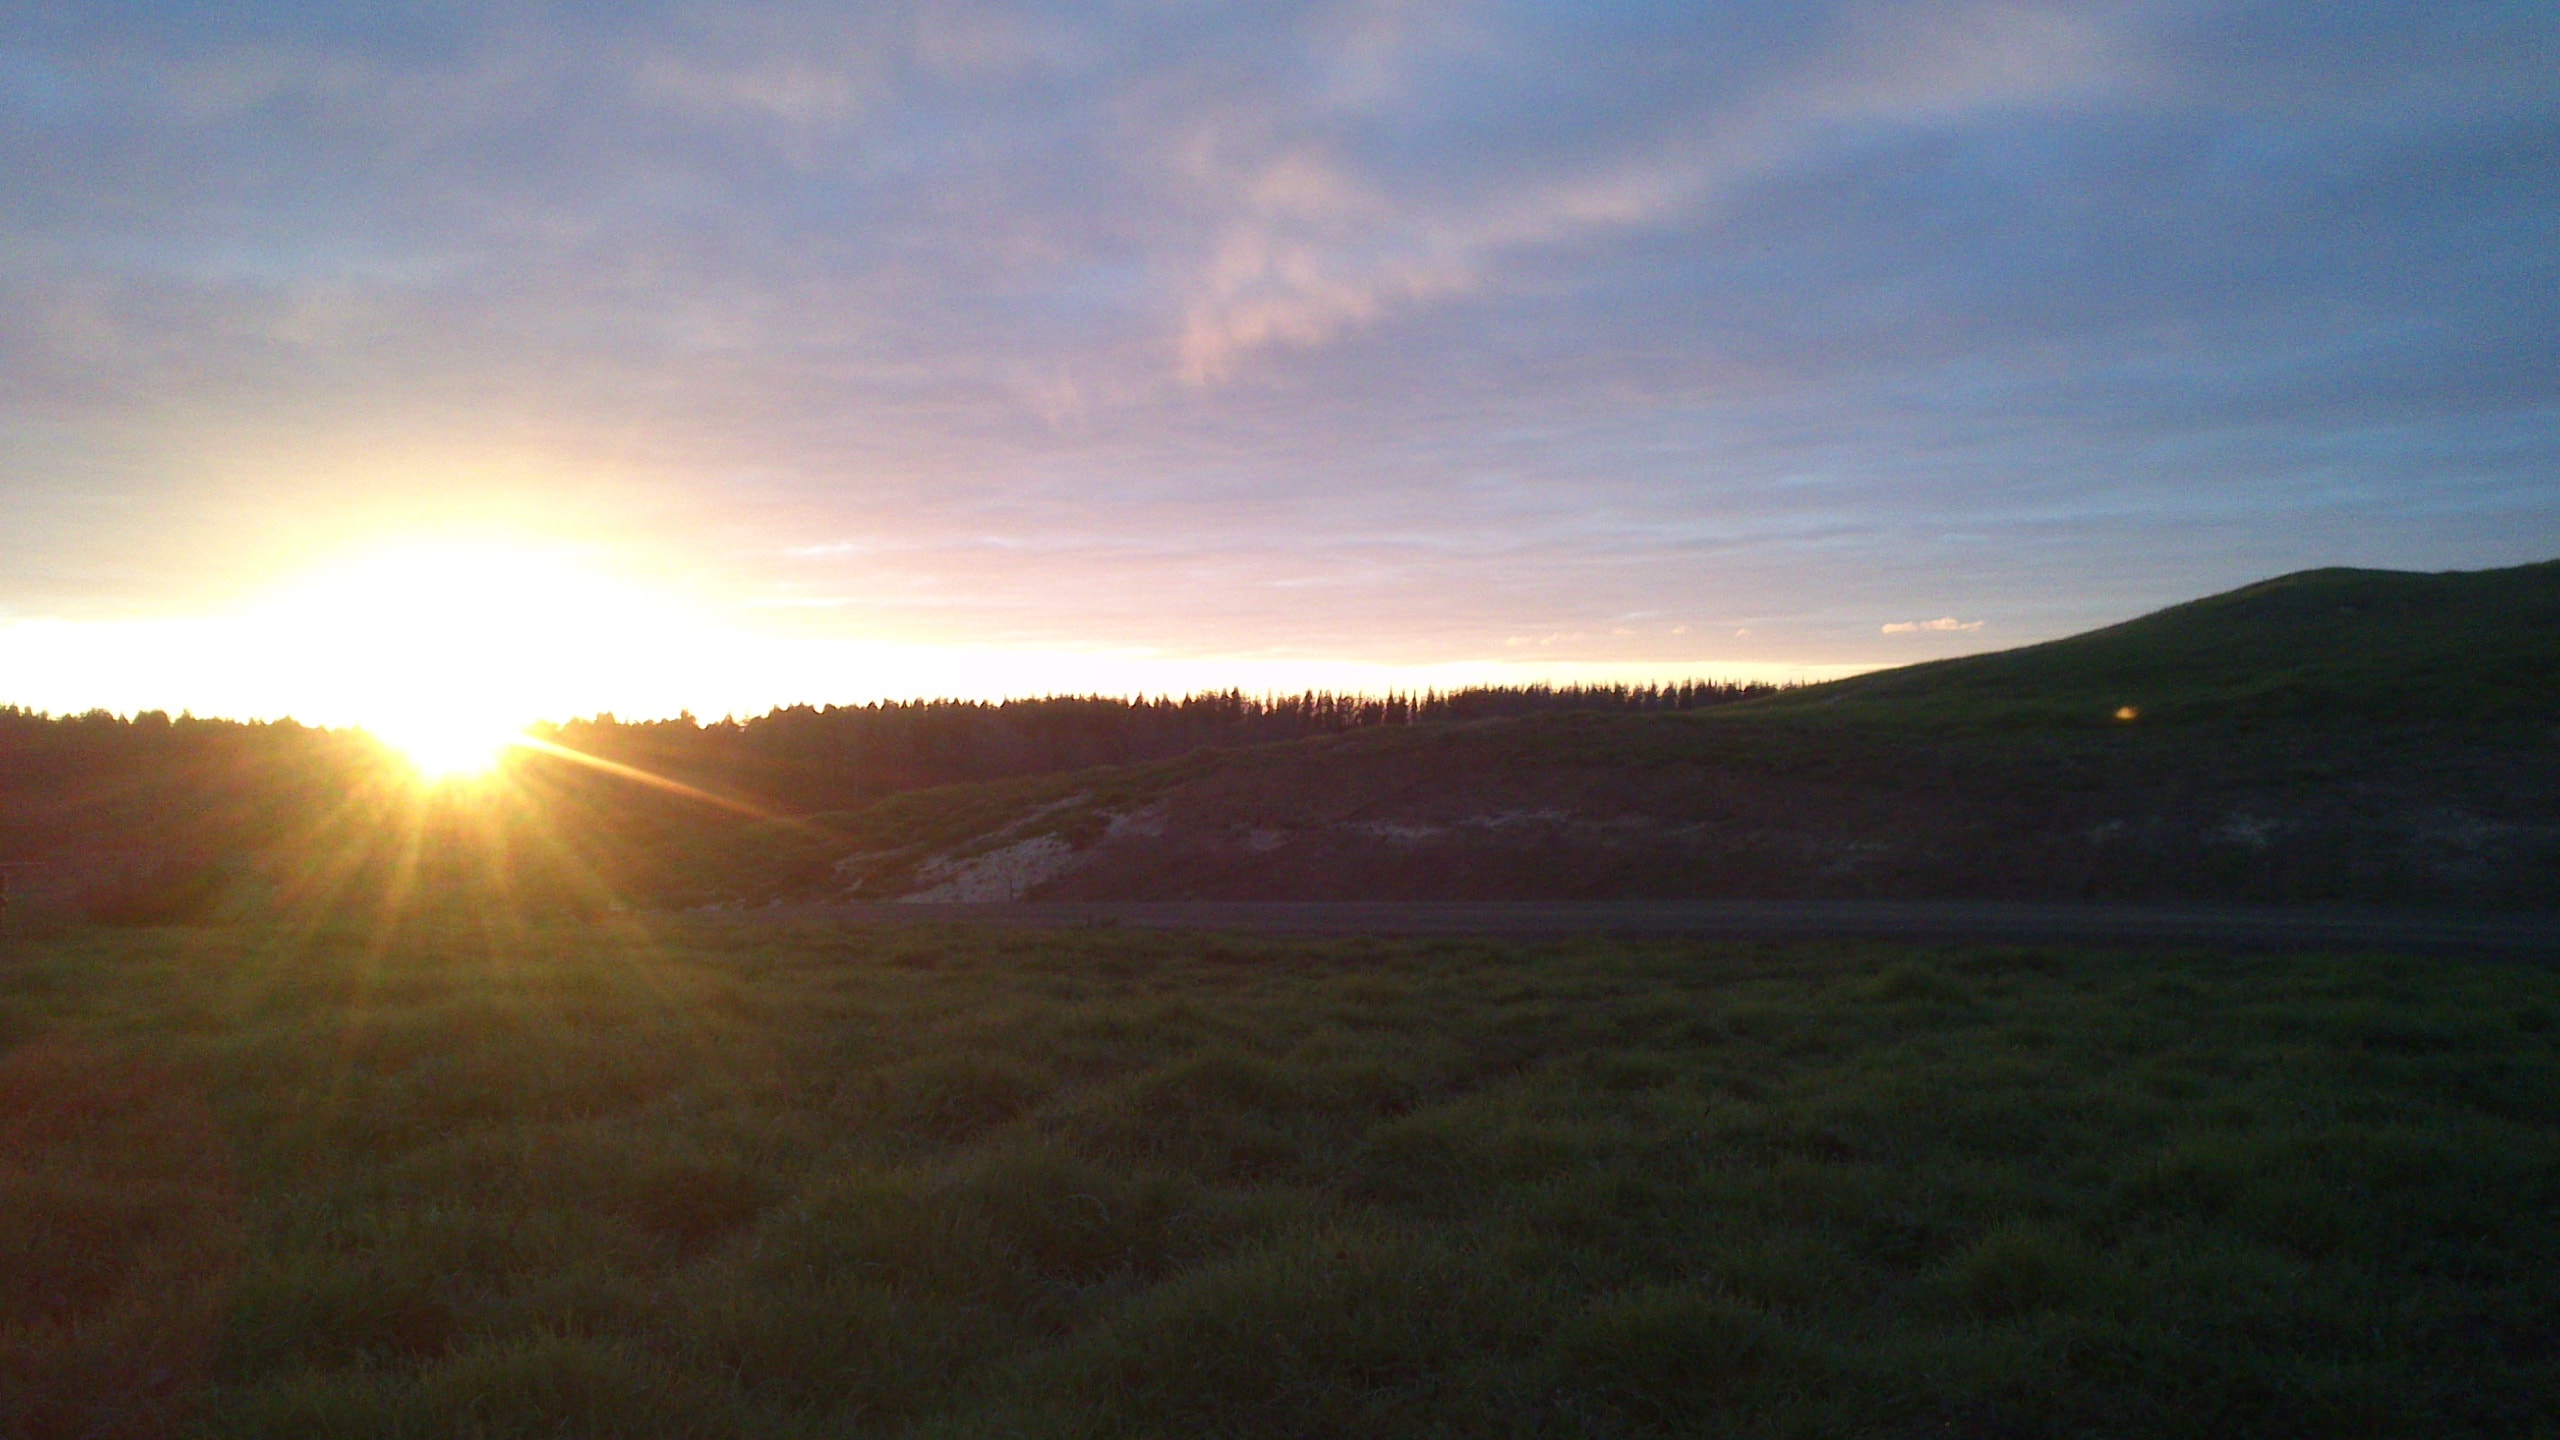 website image of sunset hills and fields for Native Solutions website offering forestry management and forestry planting